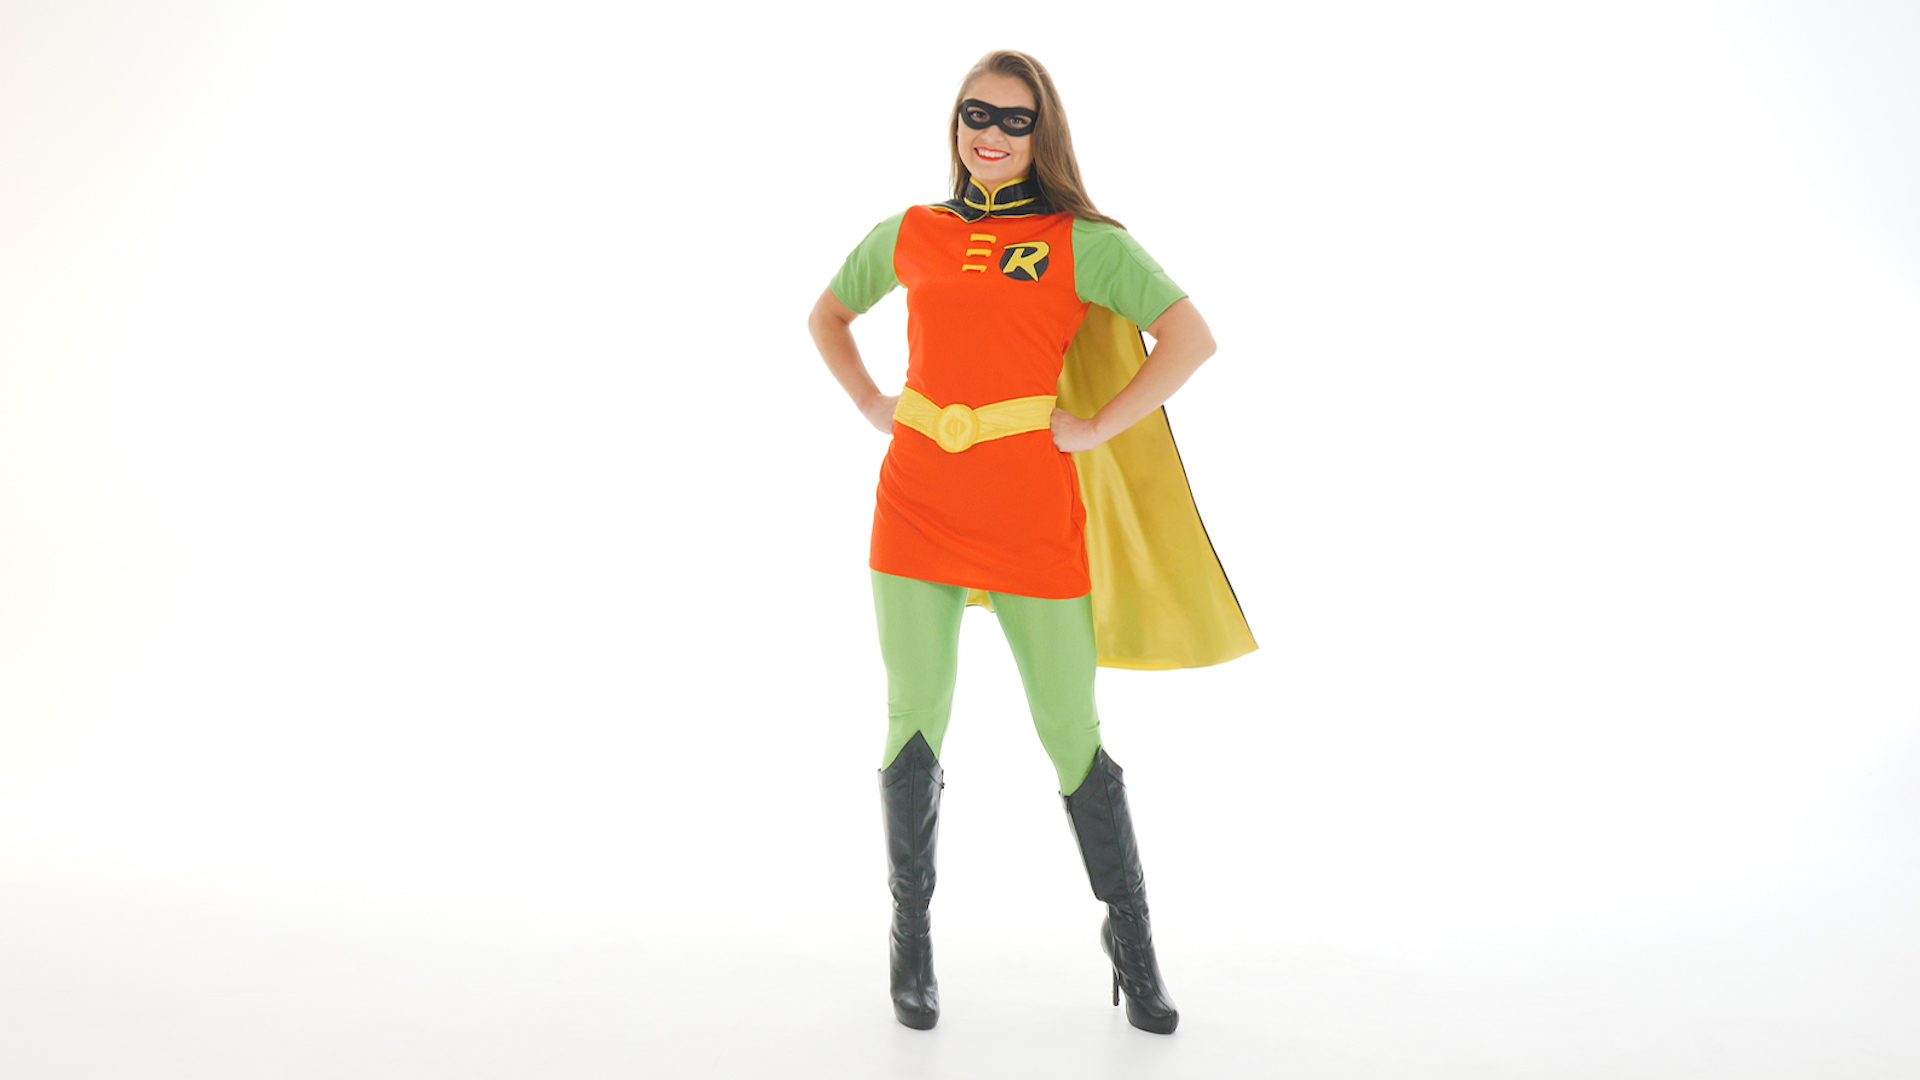 Grab Batman or go out on your own in this DC women's Robin costume based on the classic superhero character.